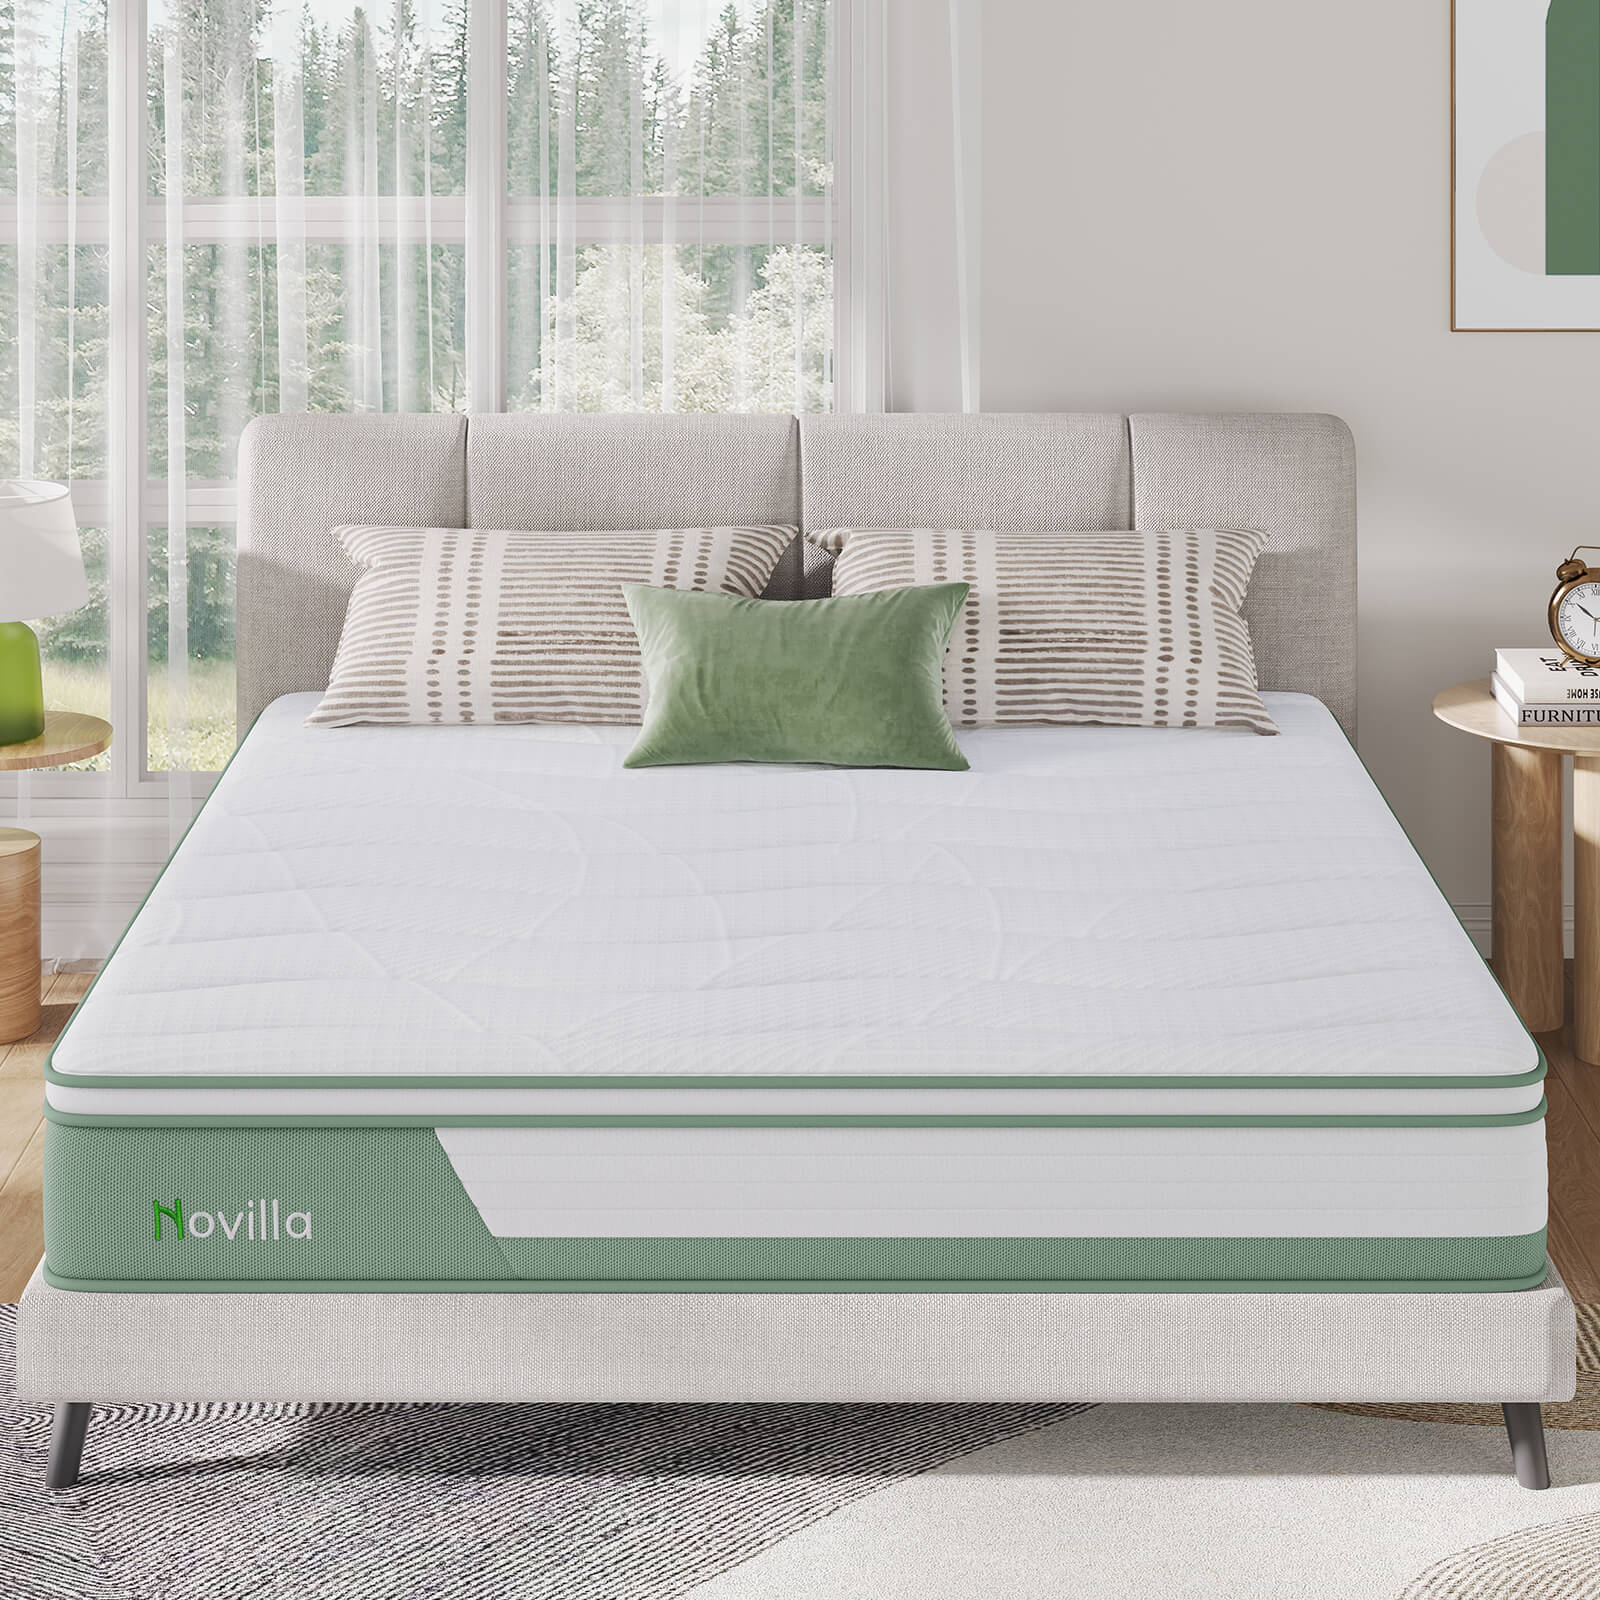 XL Twin Mattress Size: Perfect Fit for Small Spaces - 1